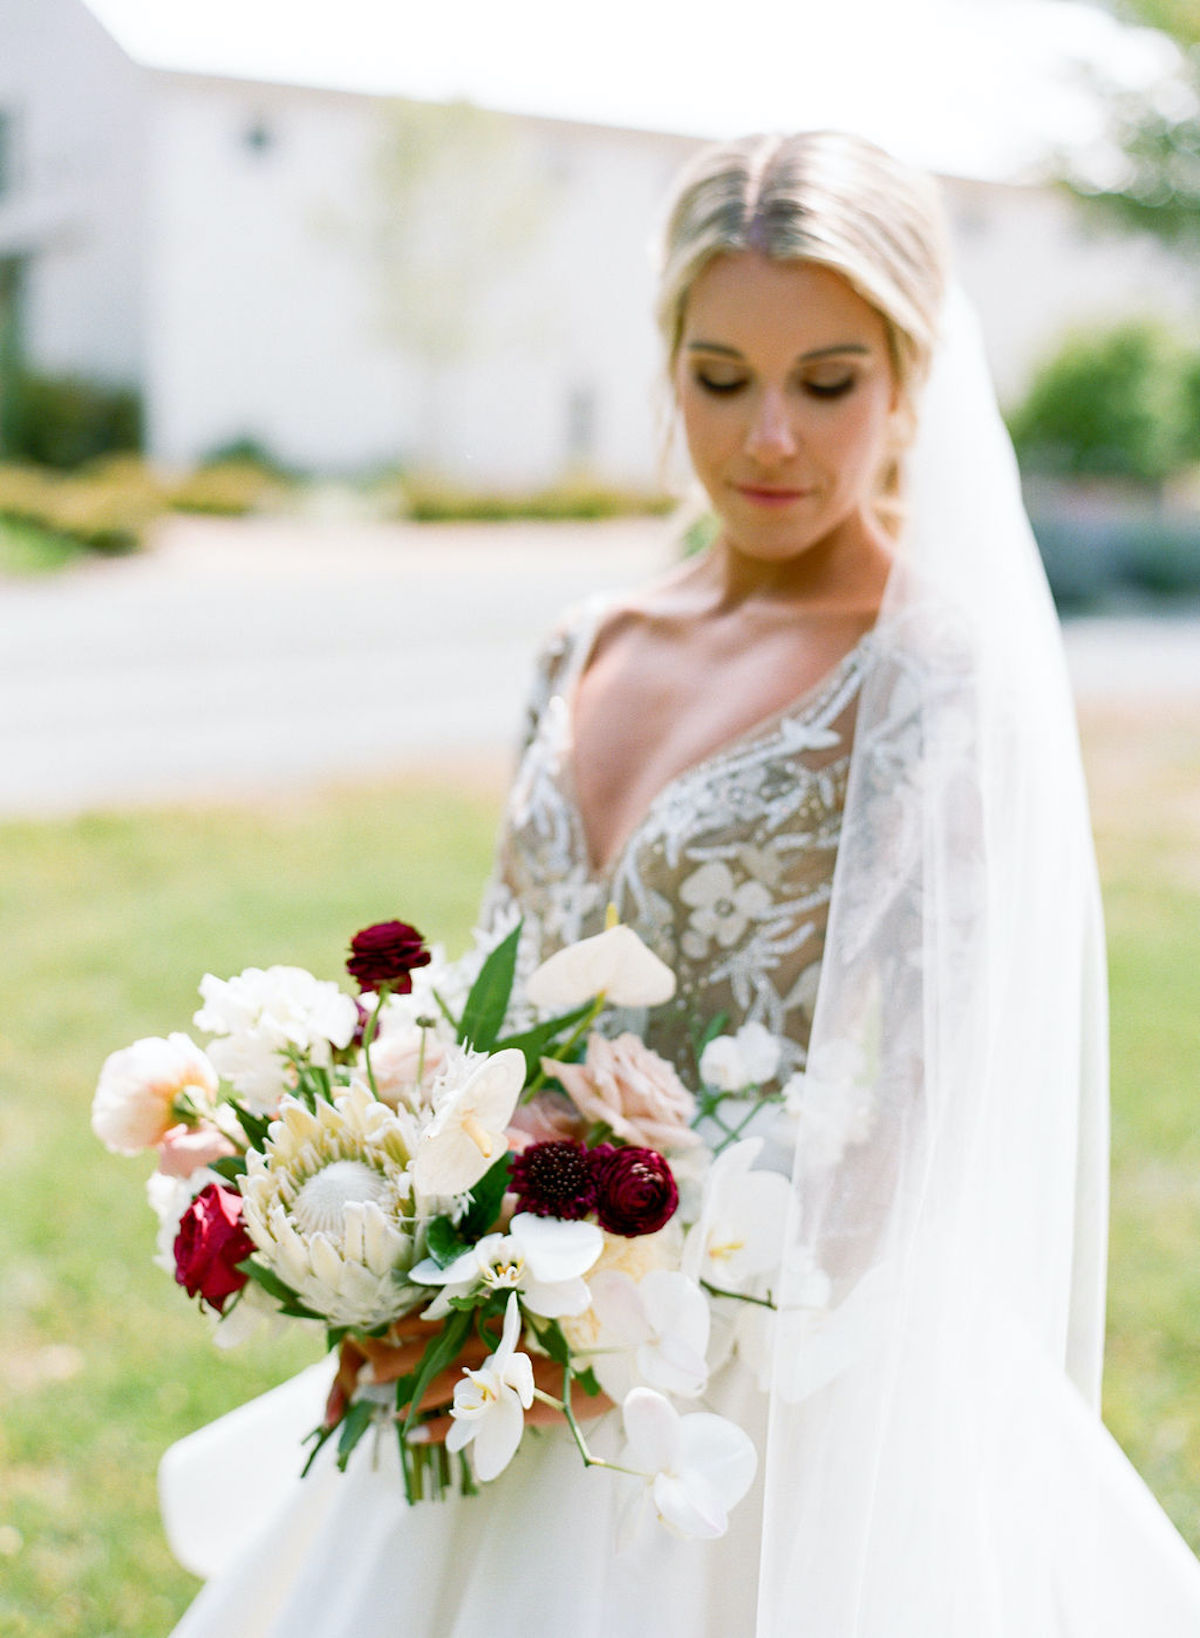 Hayley Paige bridal gown